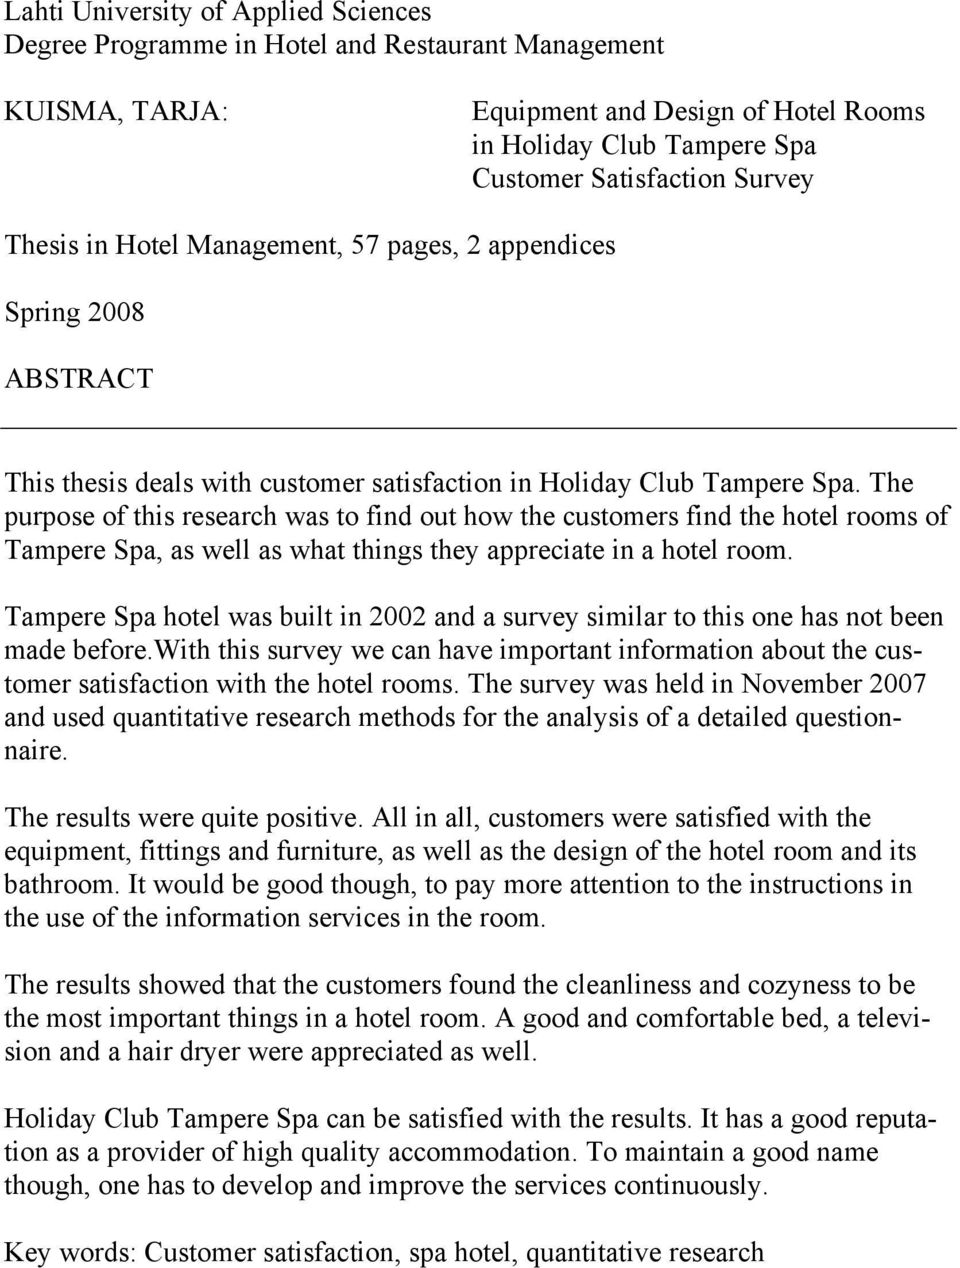 The purpose of this research was to find out how the customers find the hotel rooms of Tampere Spa, as well as what things they appreciate in a hotel room.